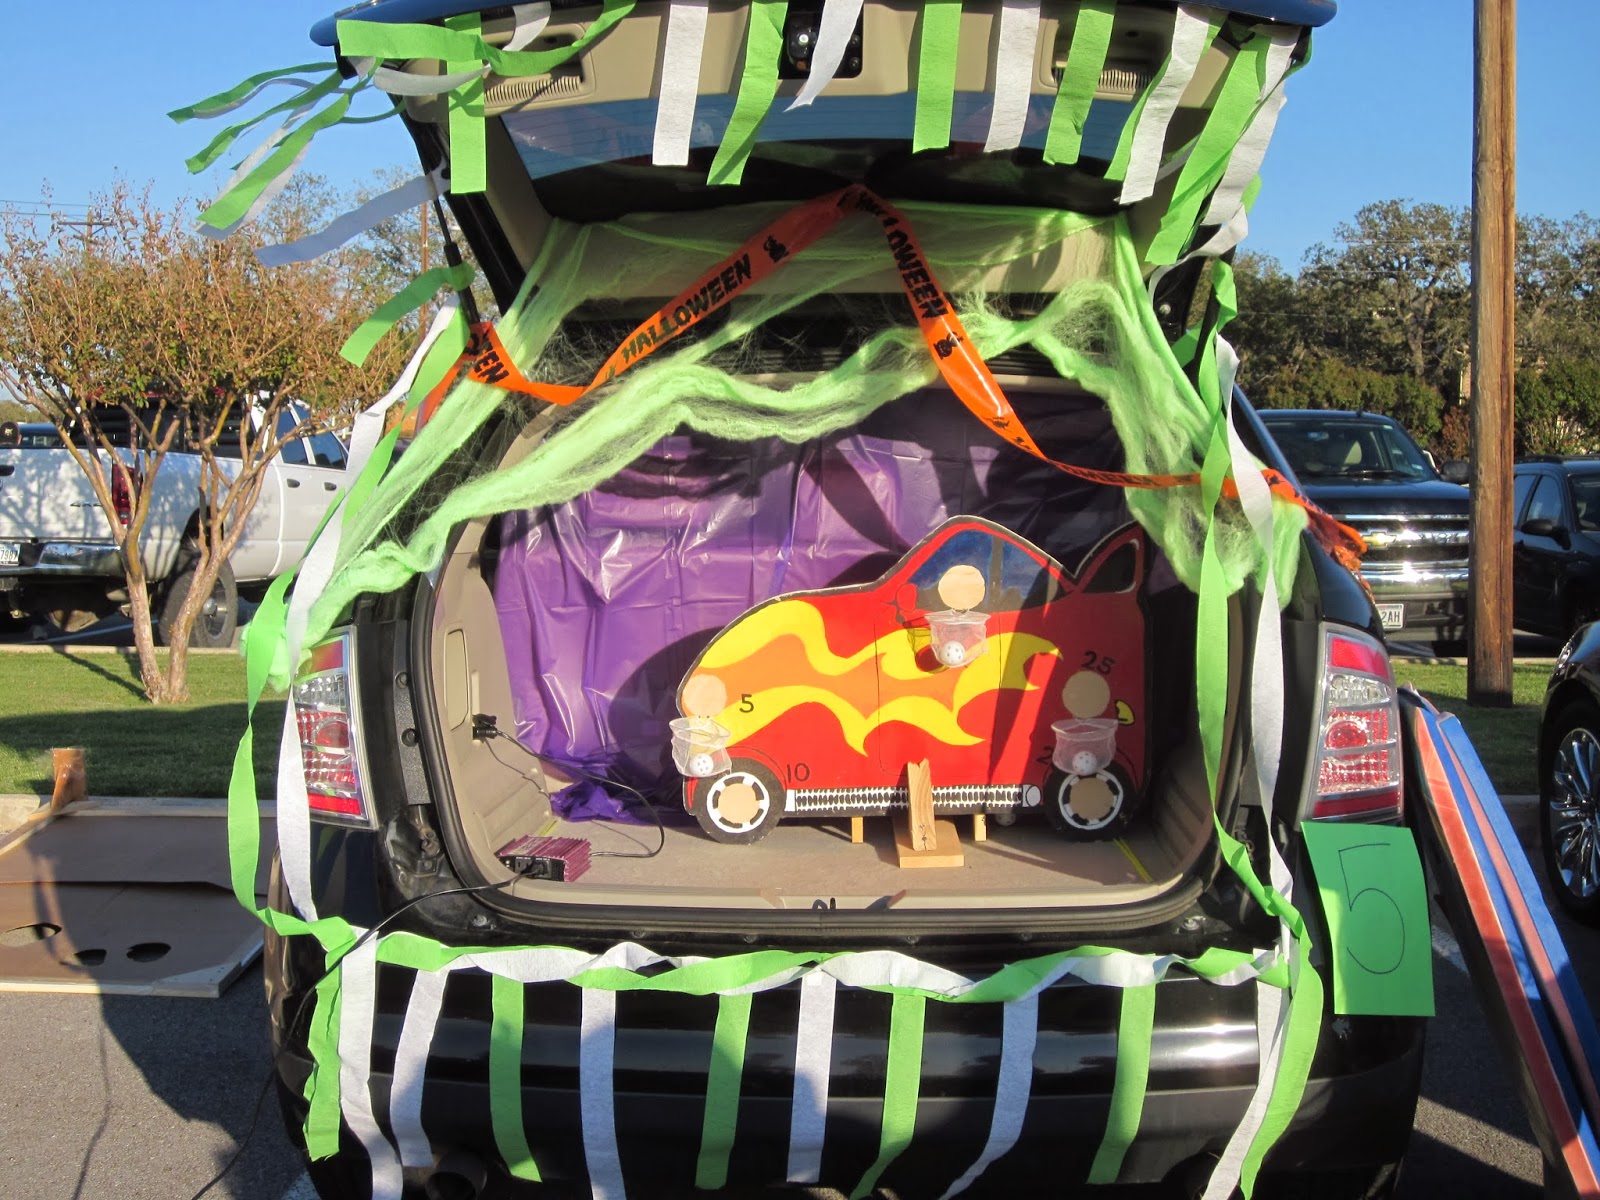 IDEAS UNLIMITED: TRUNK OR TREAT DECORATING IDEAS